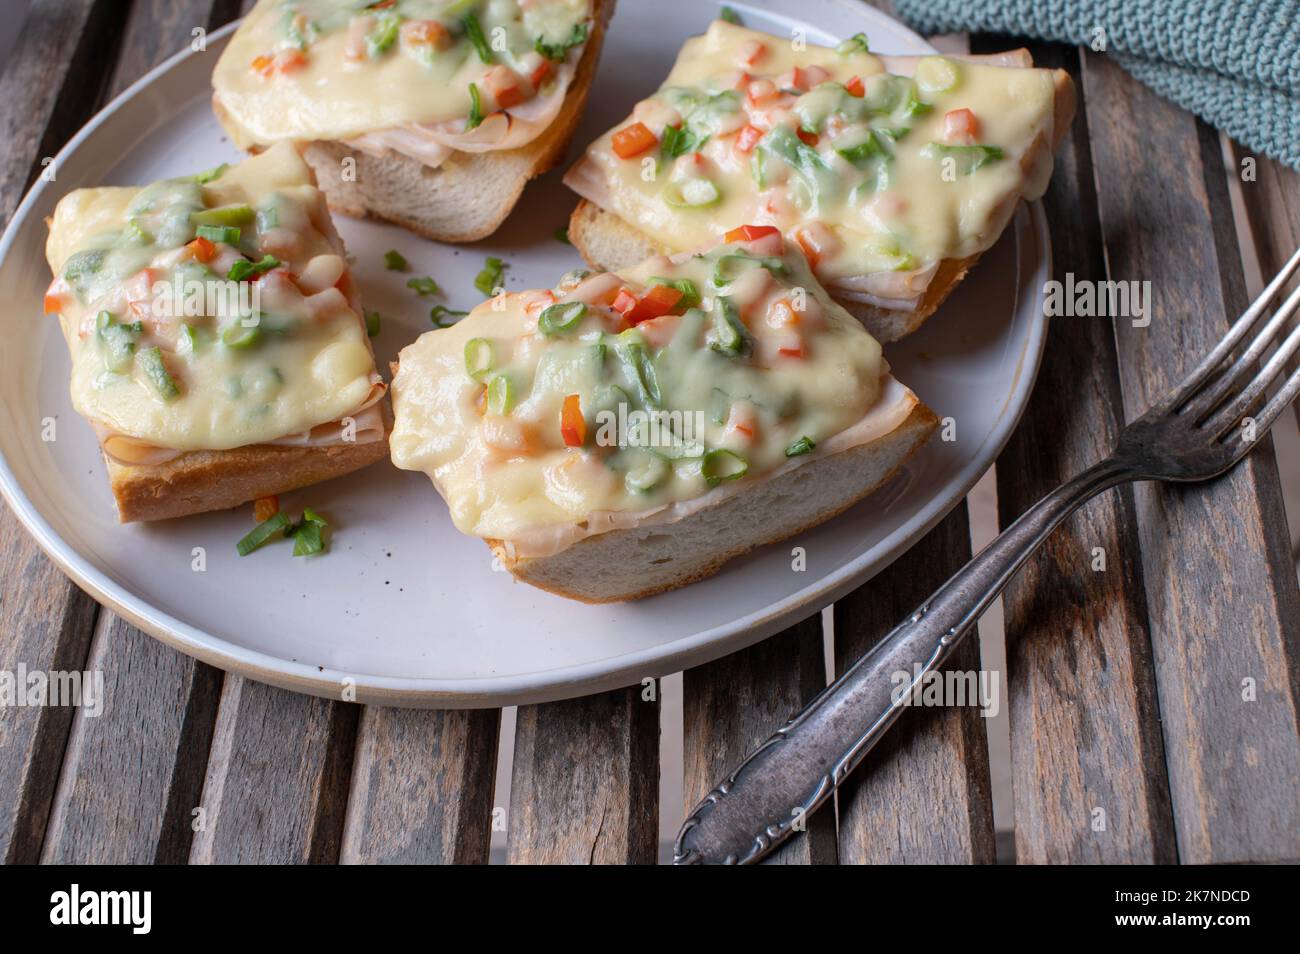 Grilled ham and cheese sandwich on french baguette with chives and bell peppers Stock Photo